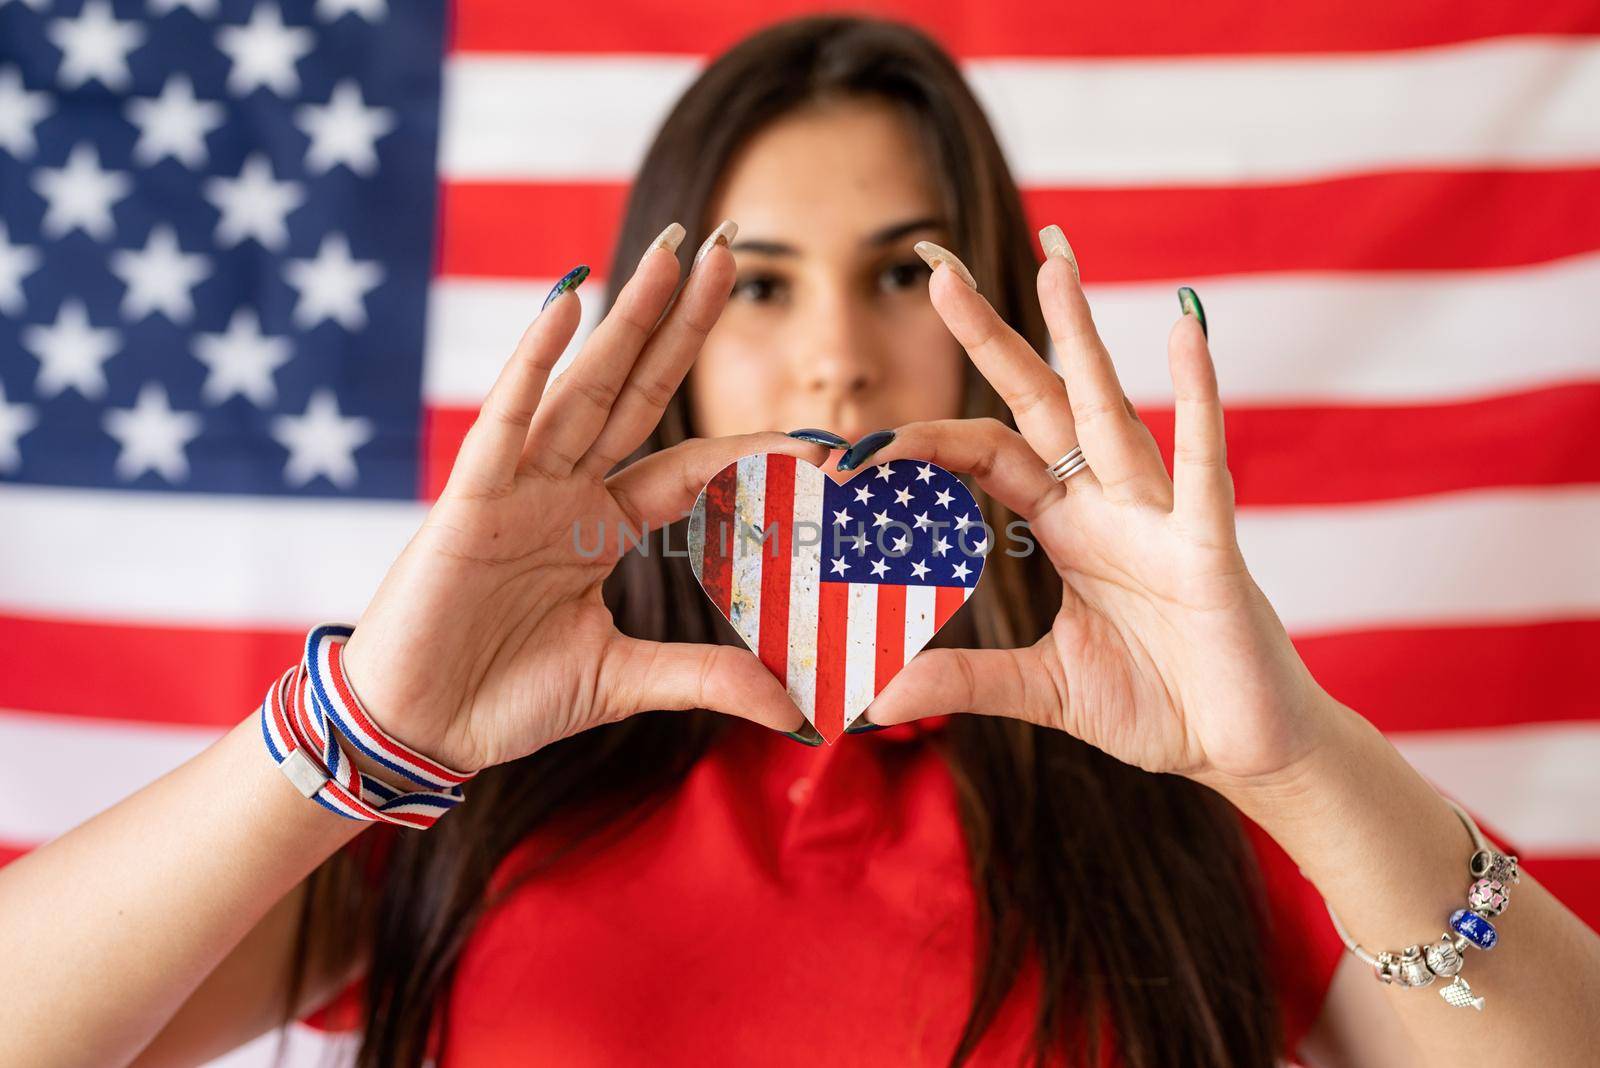 Independence day of the USA. Happy July 4th. Beautiful woman holding a heart shape national flag on the USA flag background